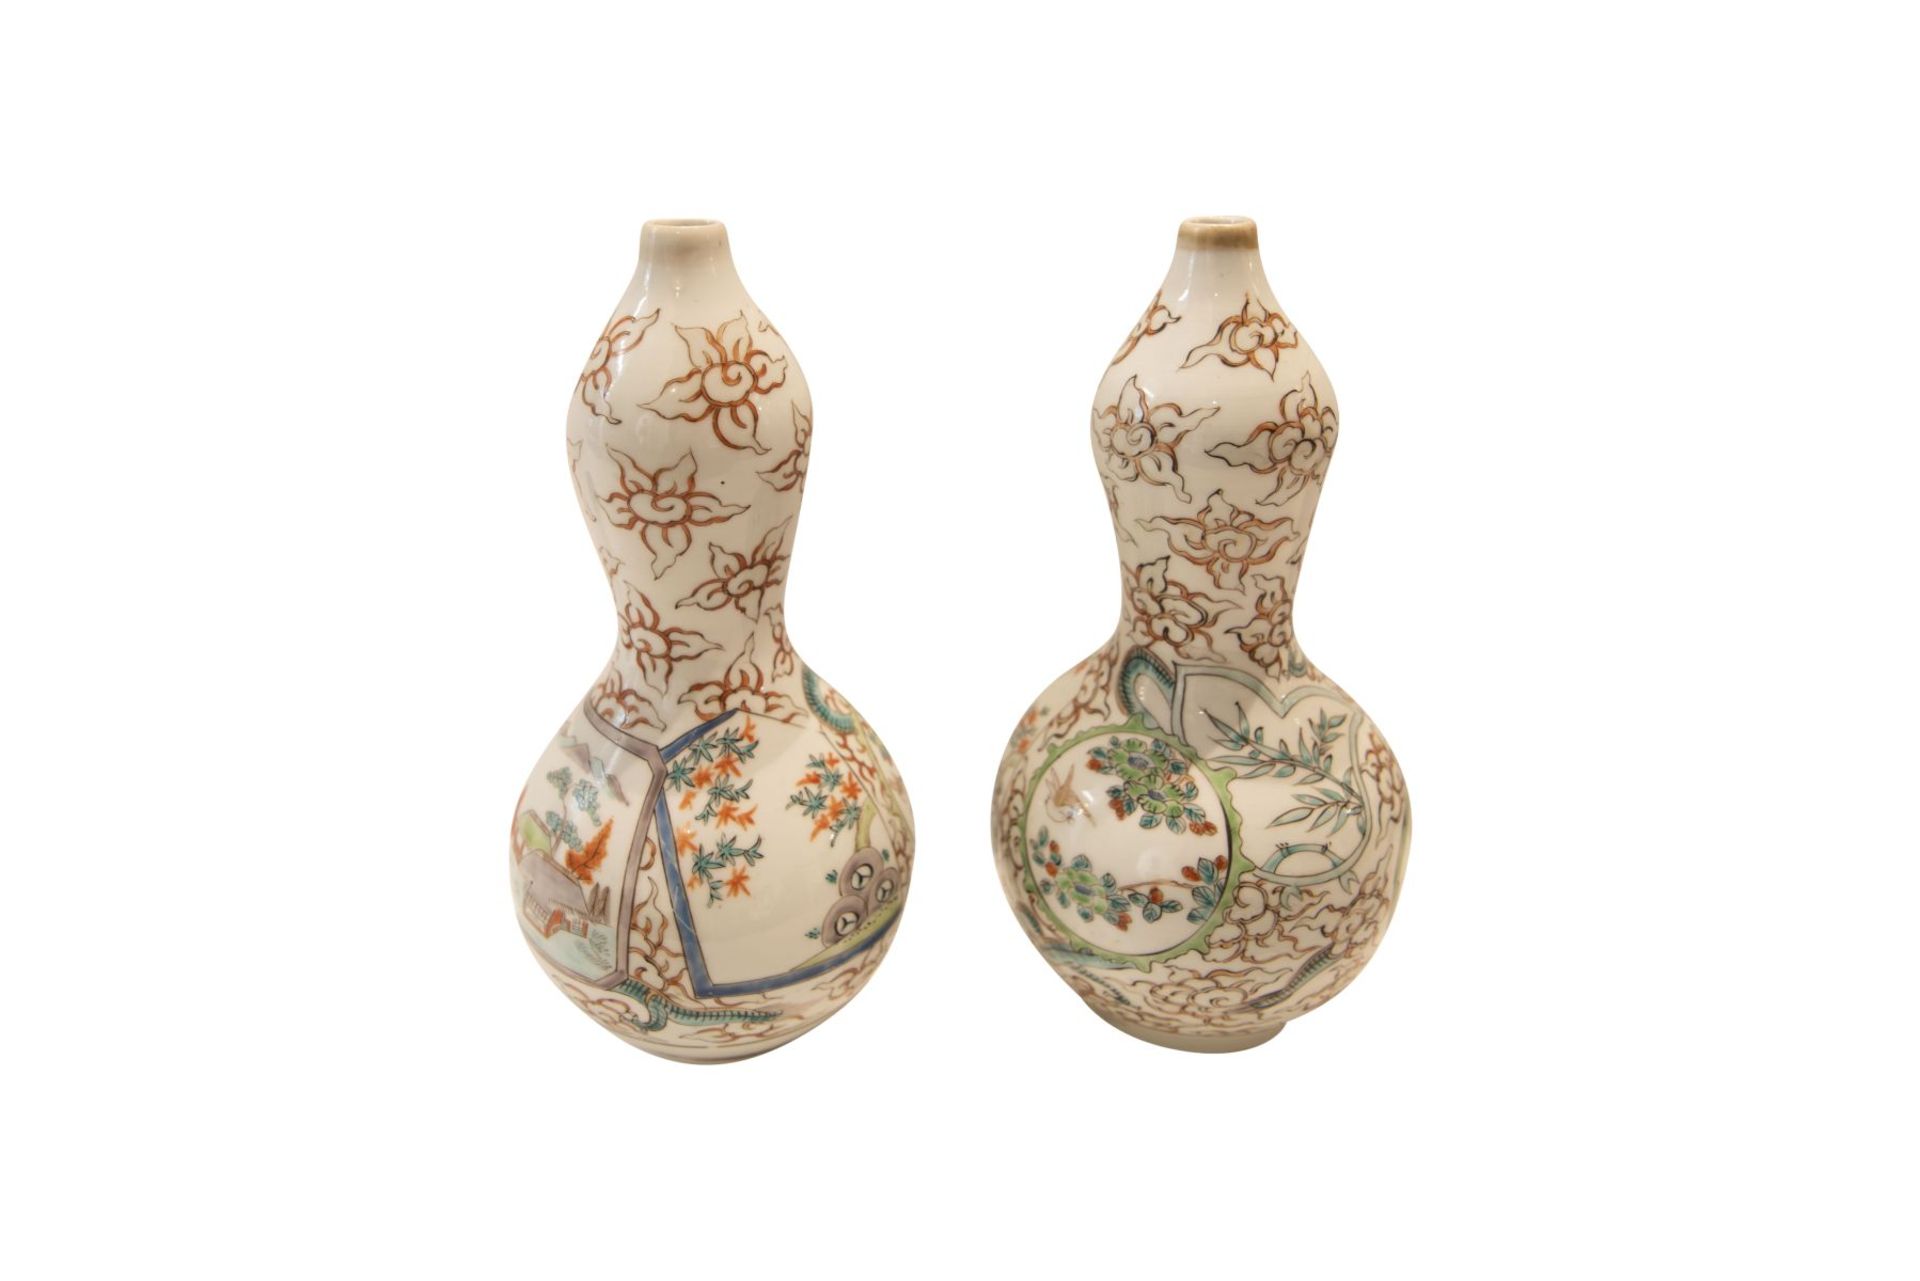 2 Asian vases - Image 2 of 5